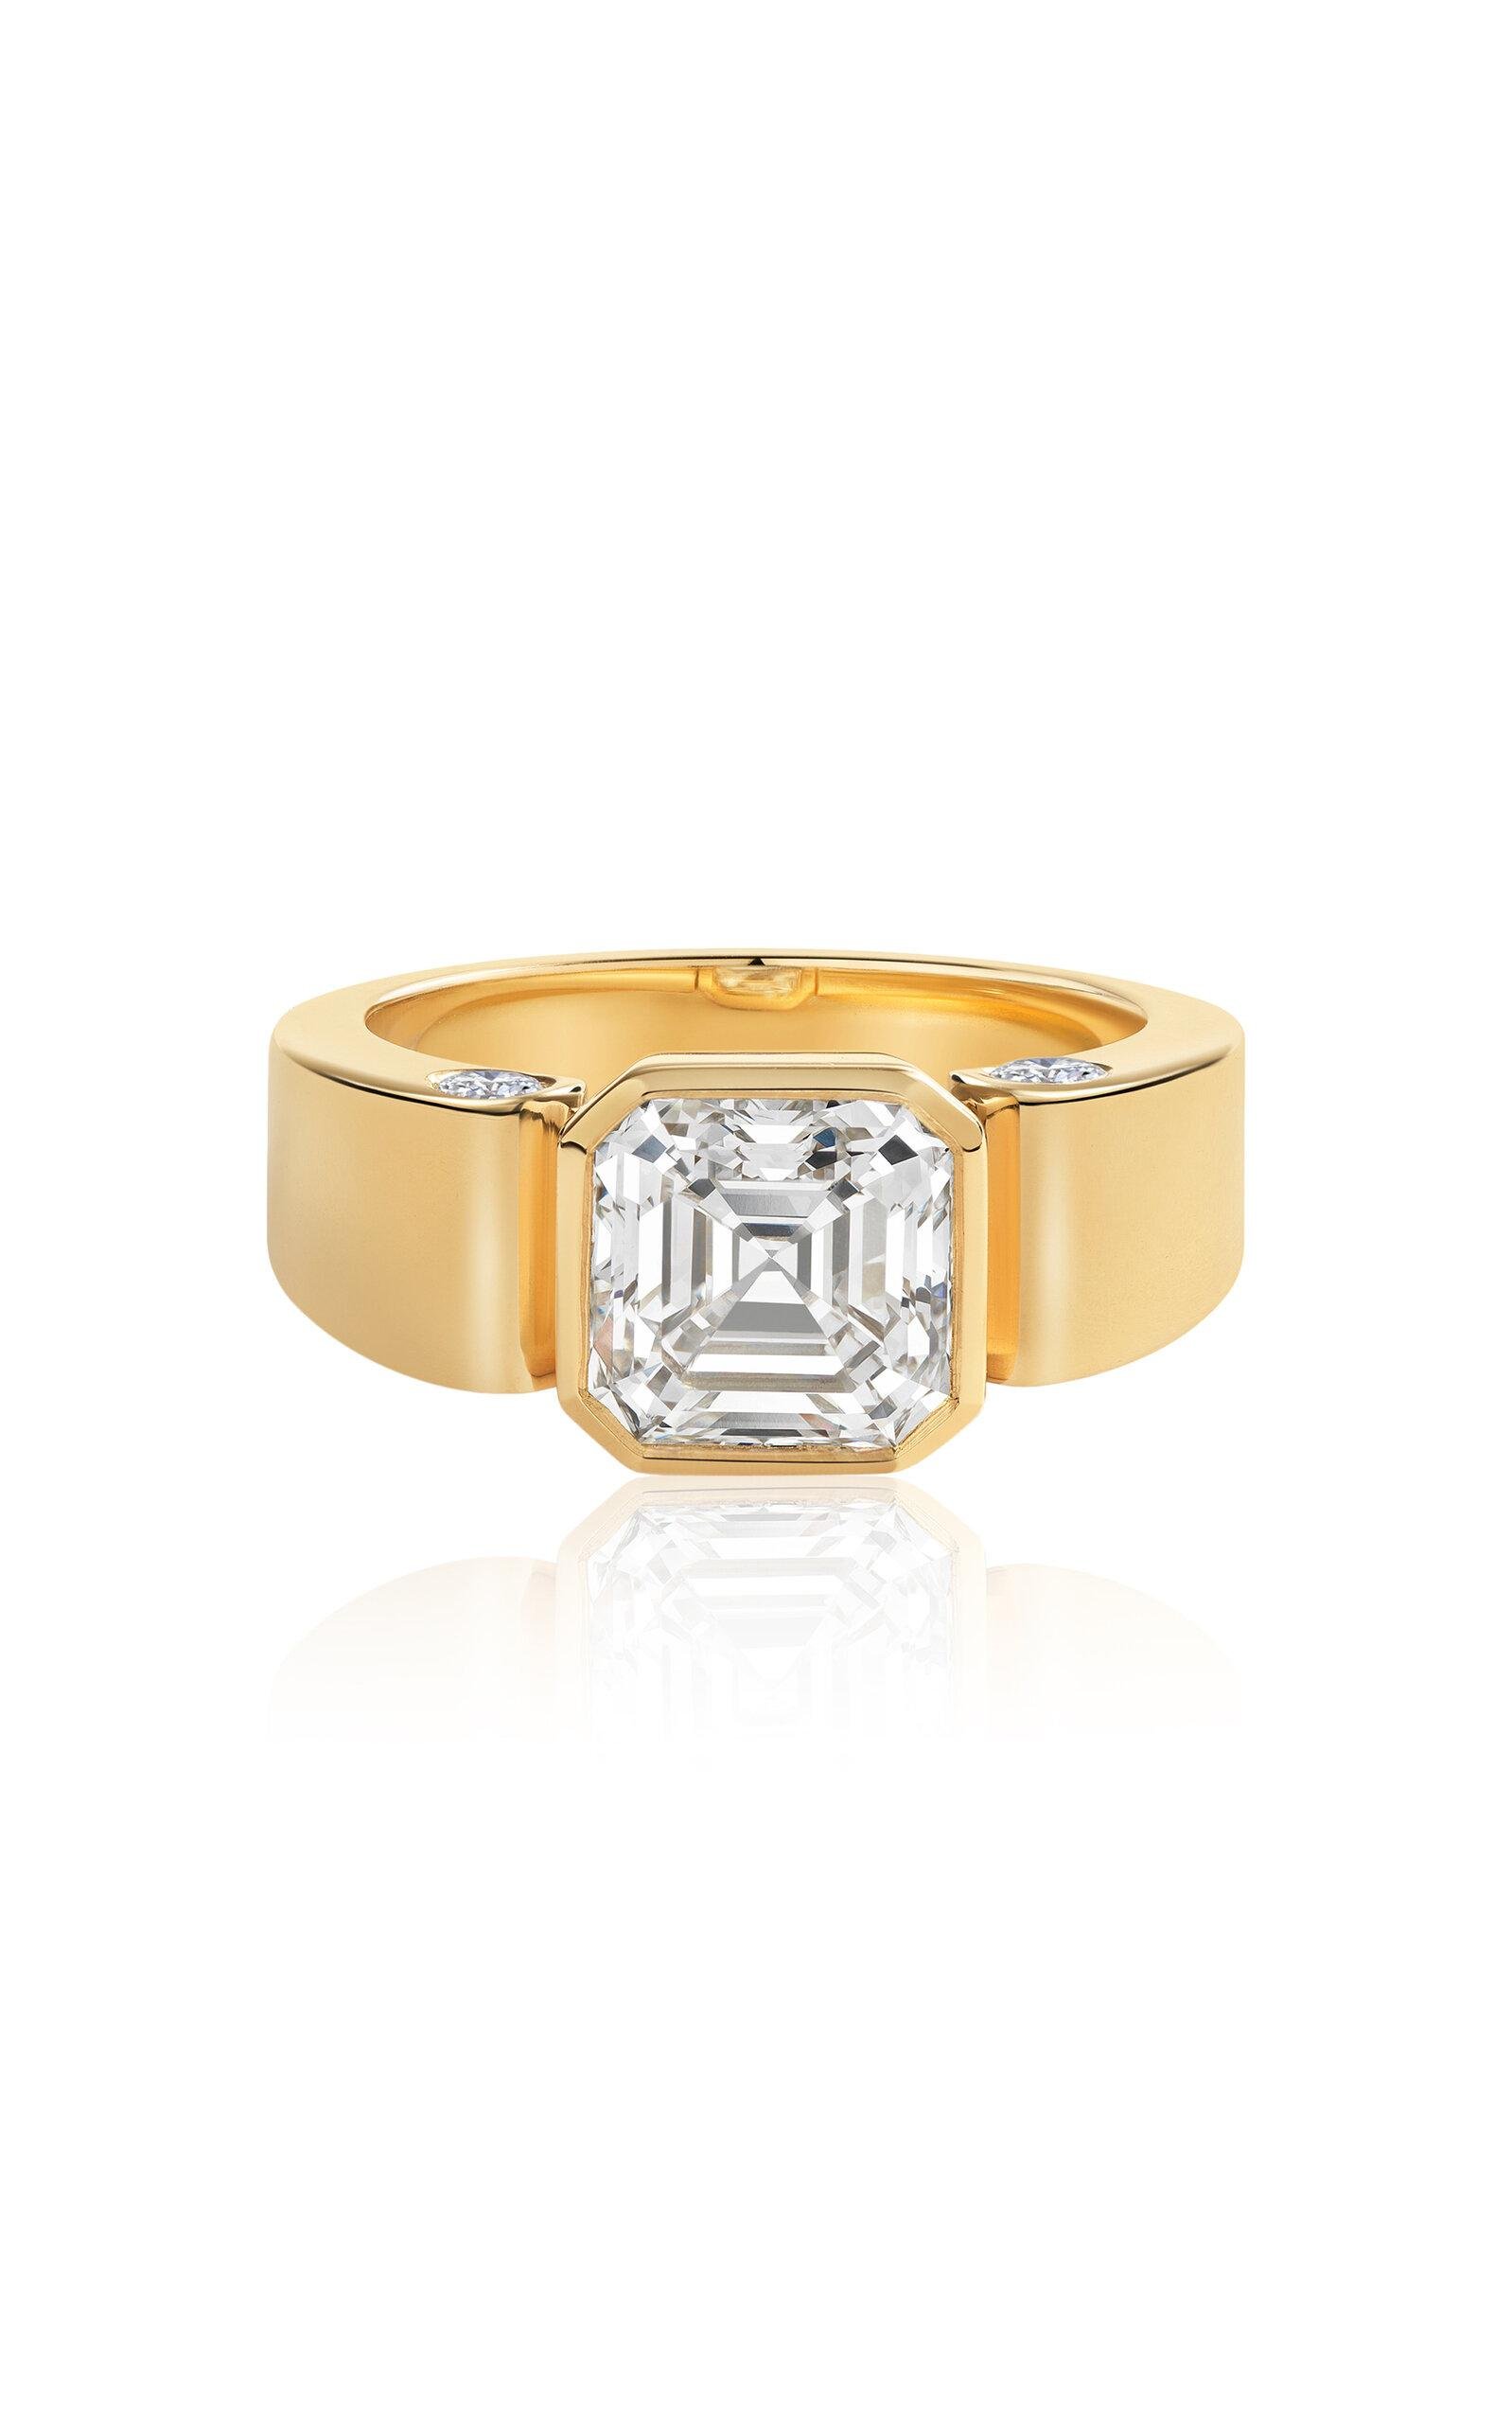 Erede - 18k Yellow Gold Axle Diamond Ring - Gold - US 7.5 - Only At Moda Operandi - Gifts For Her by EREDE